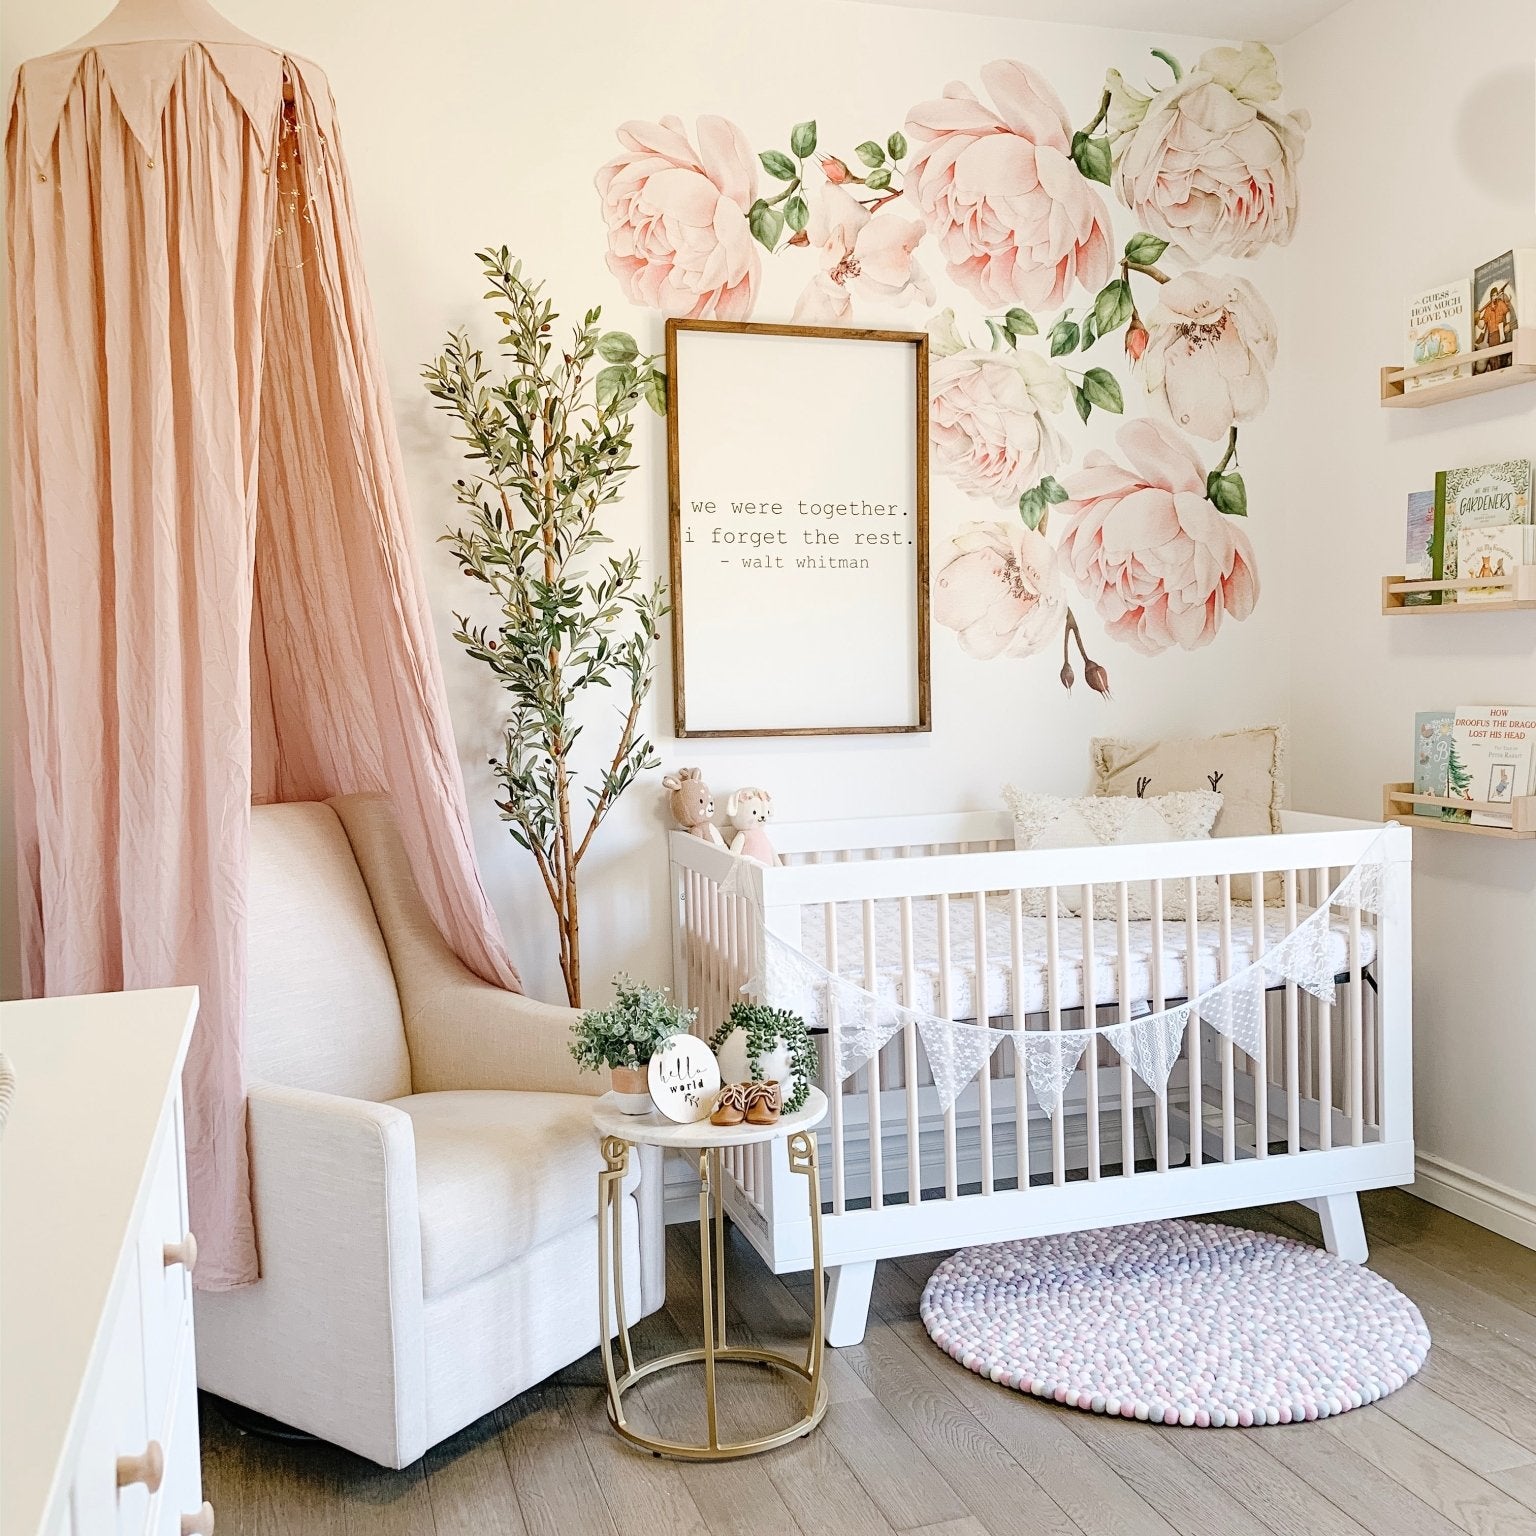 Blush Nursery with wall decal flowers for baby girl, Floral wall decals, floral wall decal, floral decals, floral decals